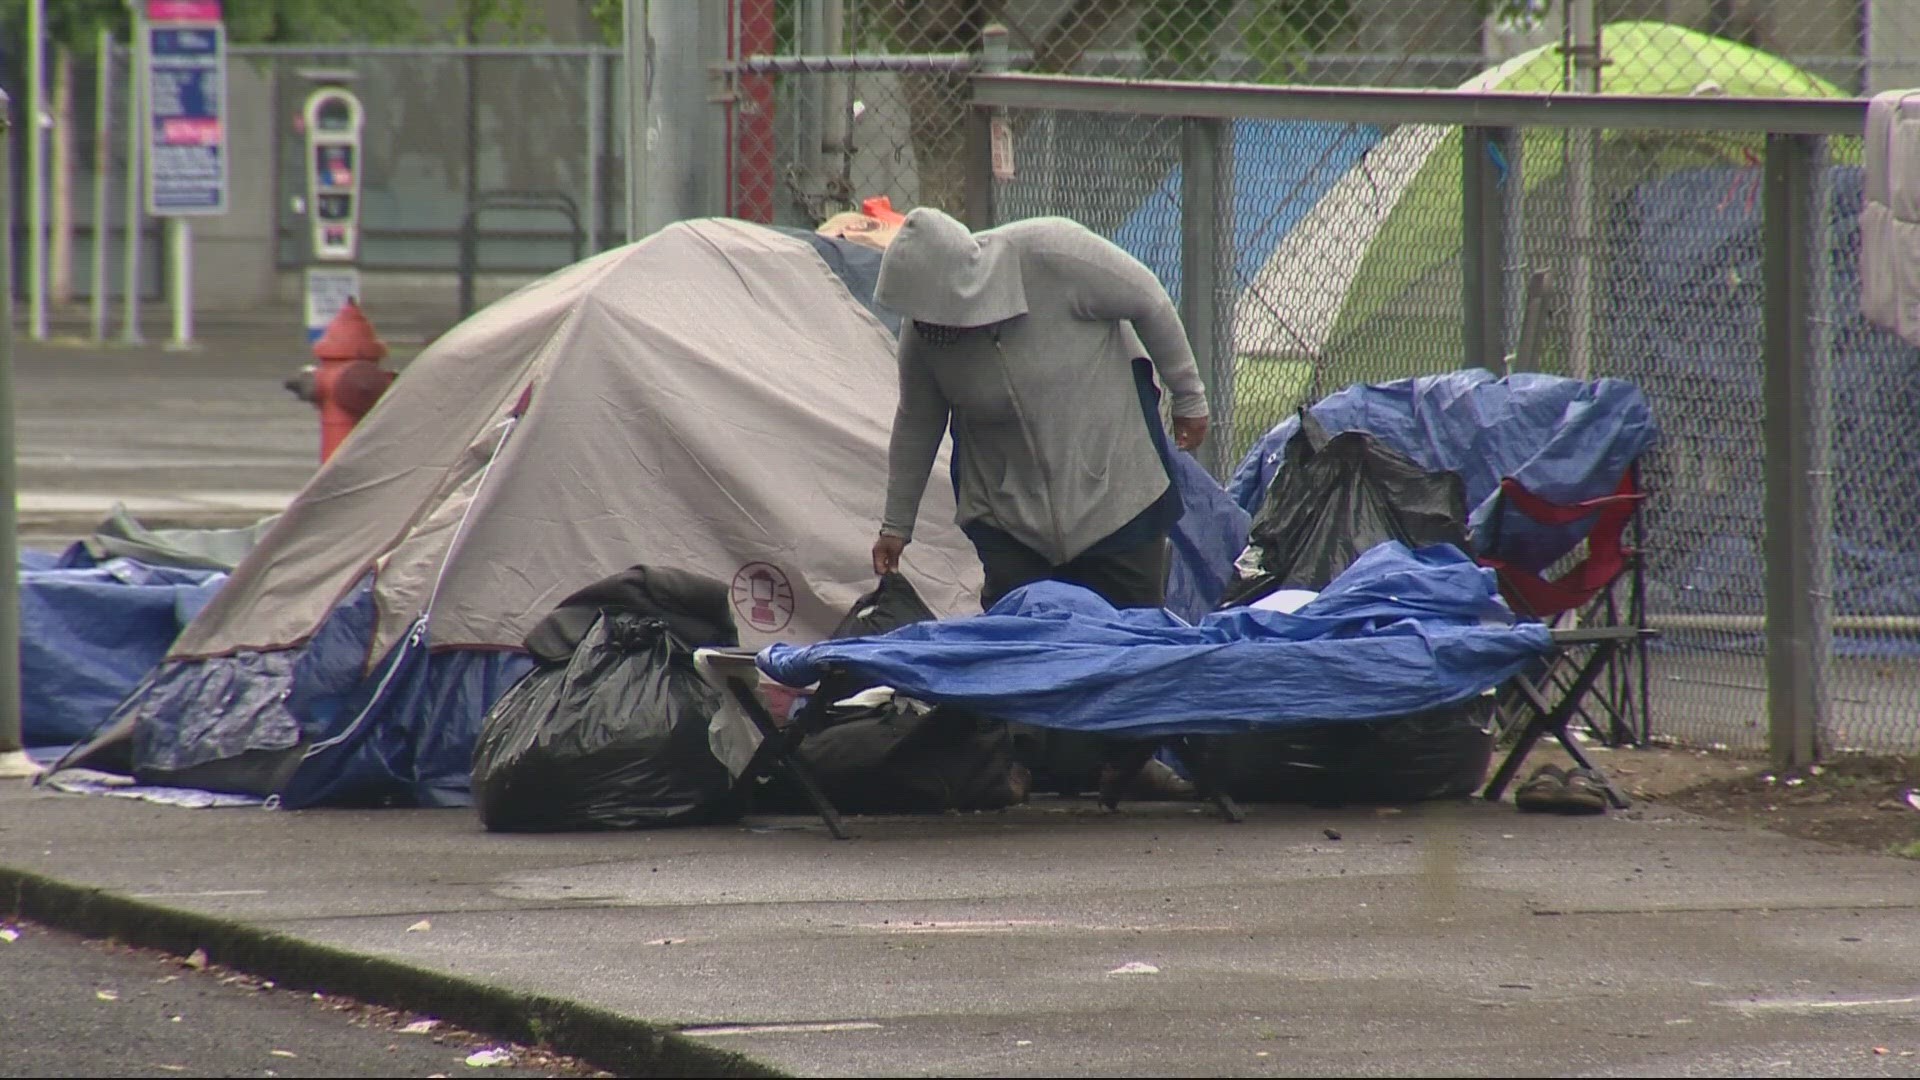 Oregon has the second-highest rate of unsheltered homelessness nationwide, according to a PSU report. But local shelters aren't at all surprised.